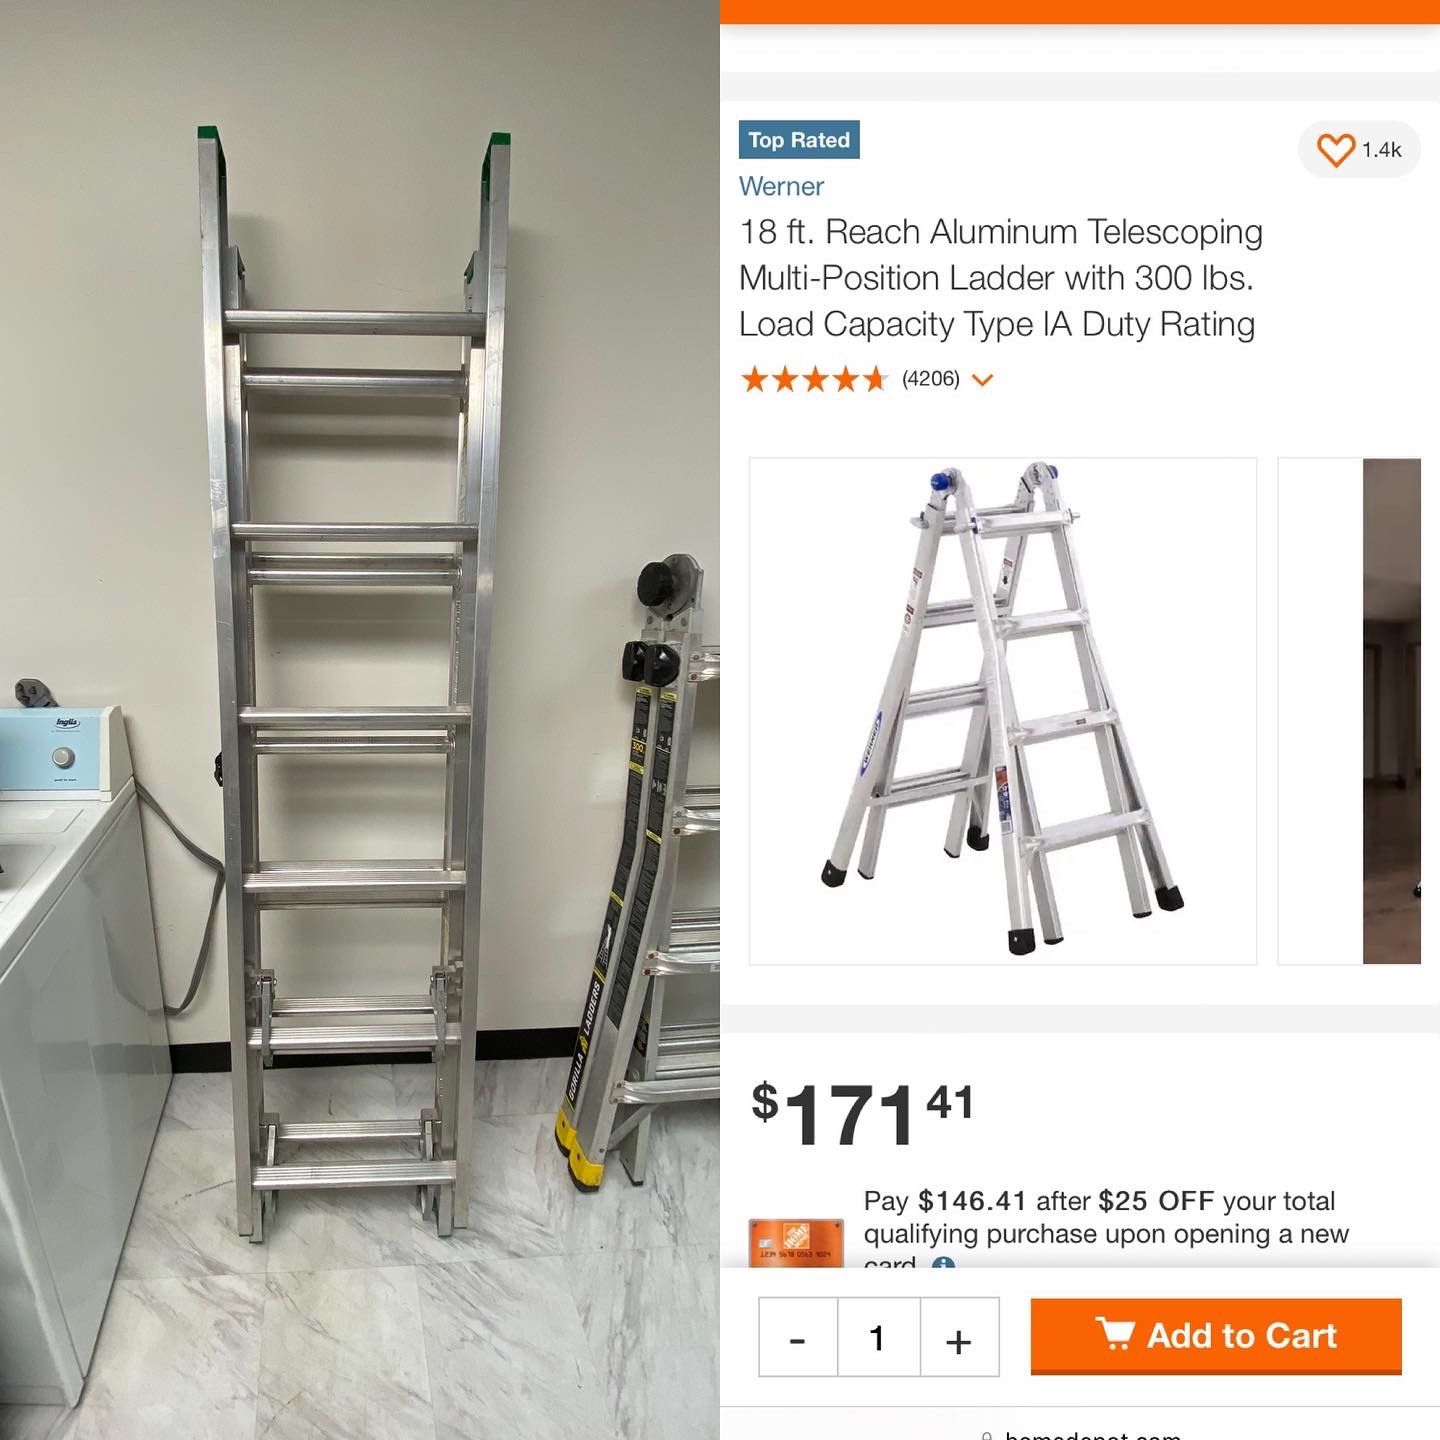 Werner 18 ft. Reach Aluminum Telescoping Multi-Position Ladder with 300 lbs. Load Capacity Type IA Duty Rating $119.99 - Located at Hidden Treasures t